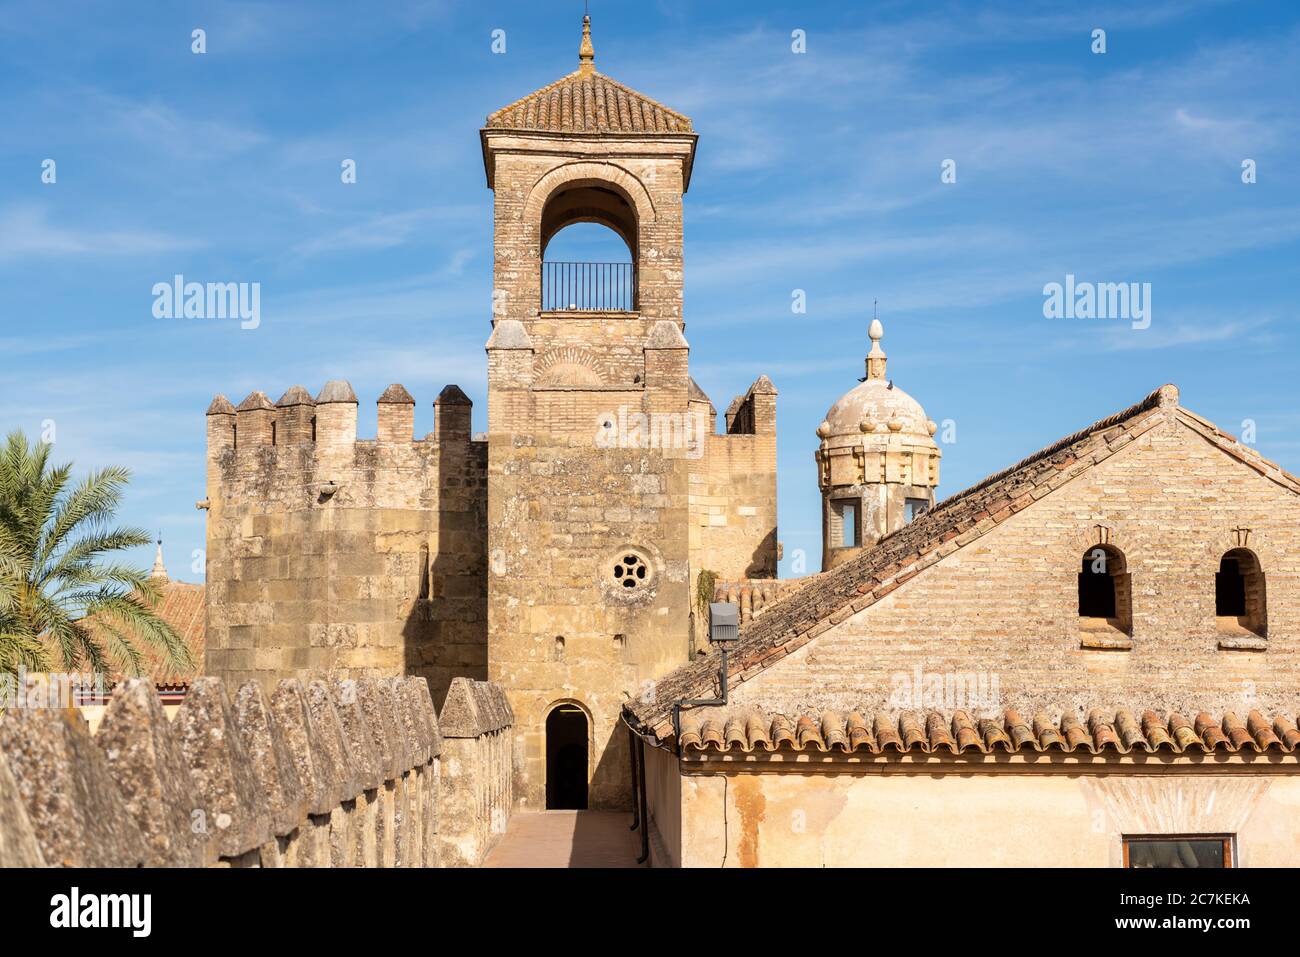 The 14th century crenelated Tower of Homage (or Clock Tower) of the historic Alcázar de los Reyes Cristianos in Córdoba Stock Photo